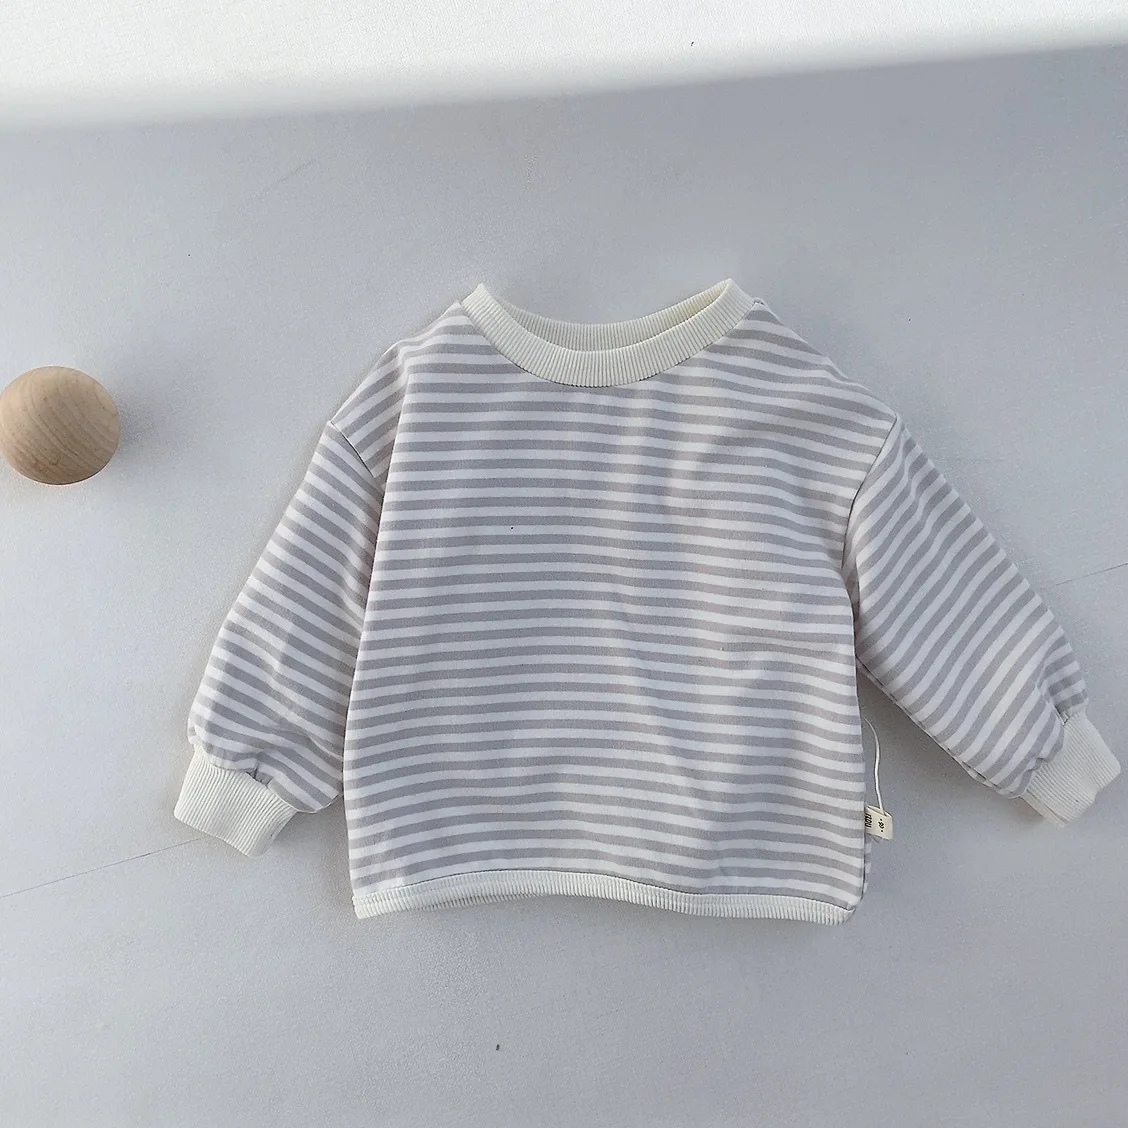 2022 Autumn Children's Long-sleeved Tops Girls' Striped Pullovers Boys' Casual Sports T-shirt Tops 4